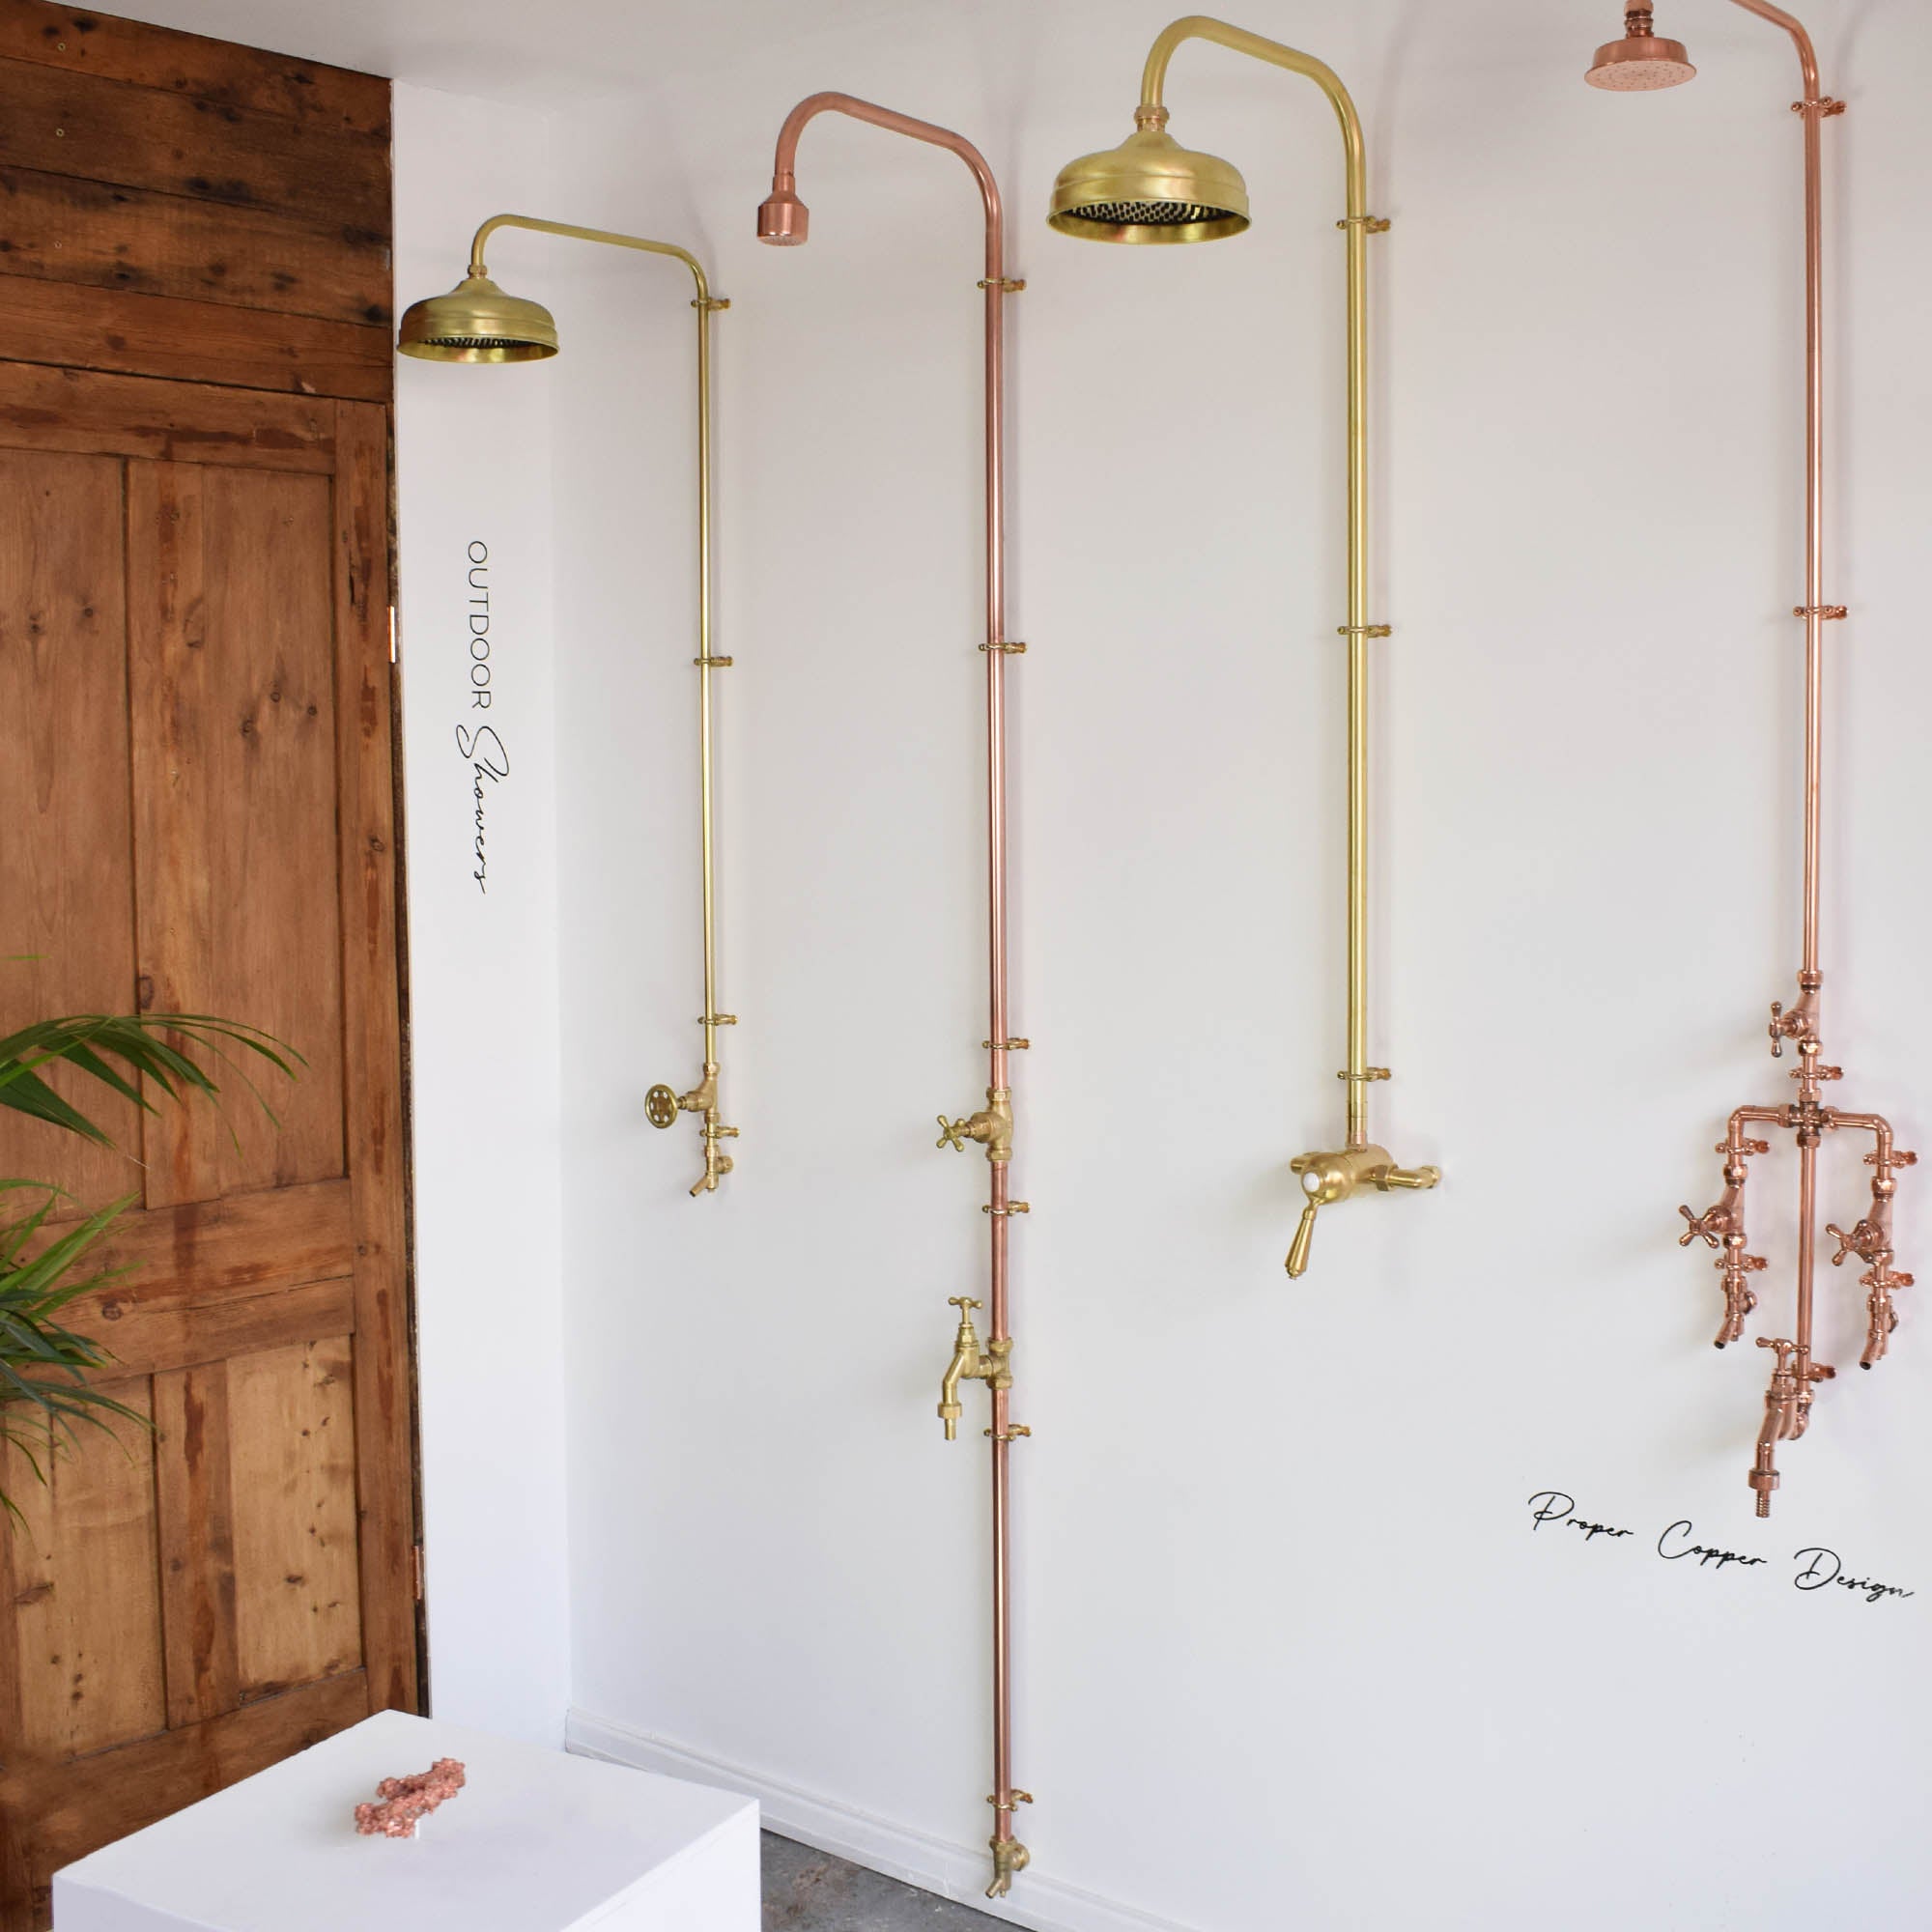 backyard showers available in our Brighton showroom